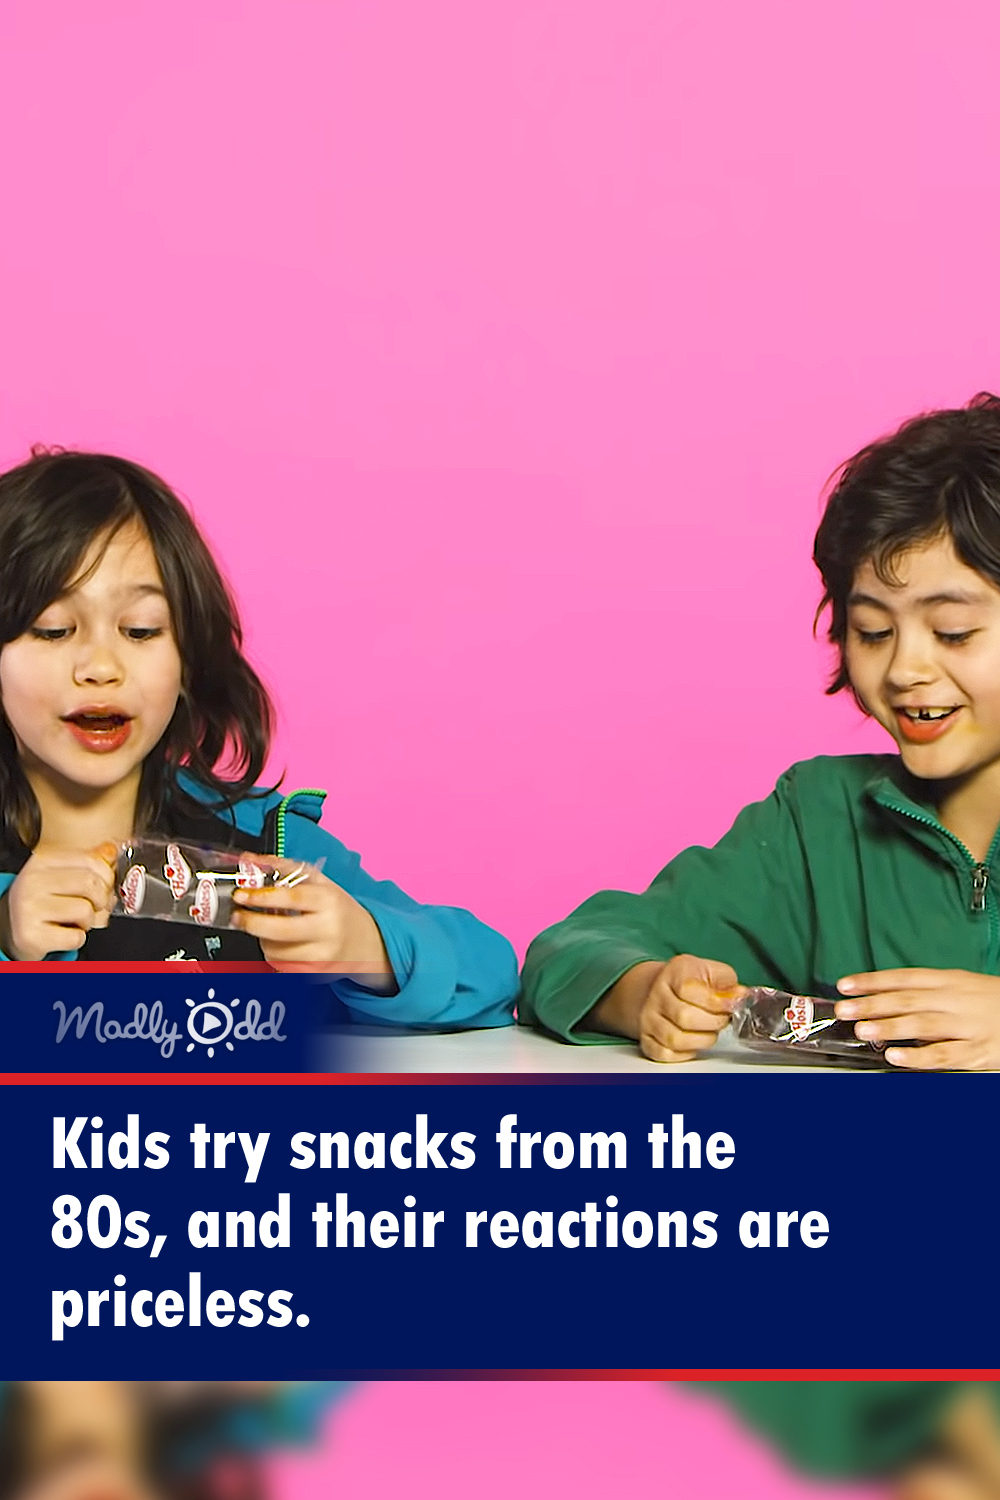 Kids try snacks from the 80s, and their reactions are priceless